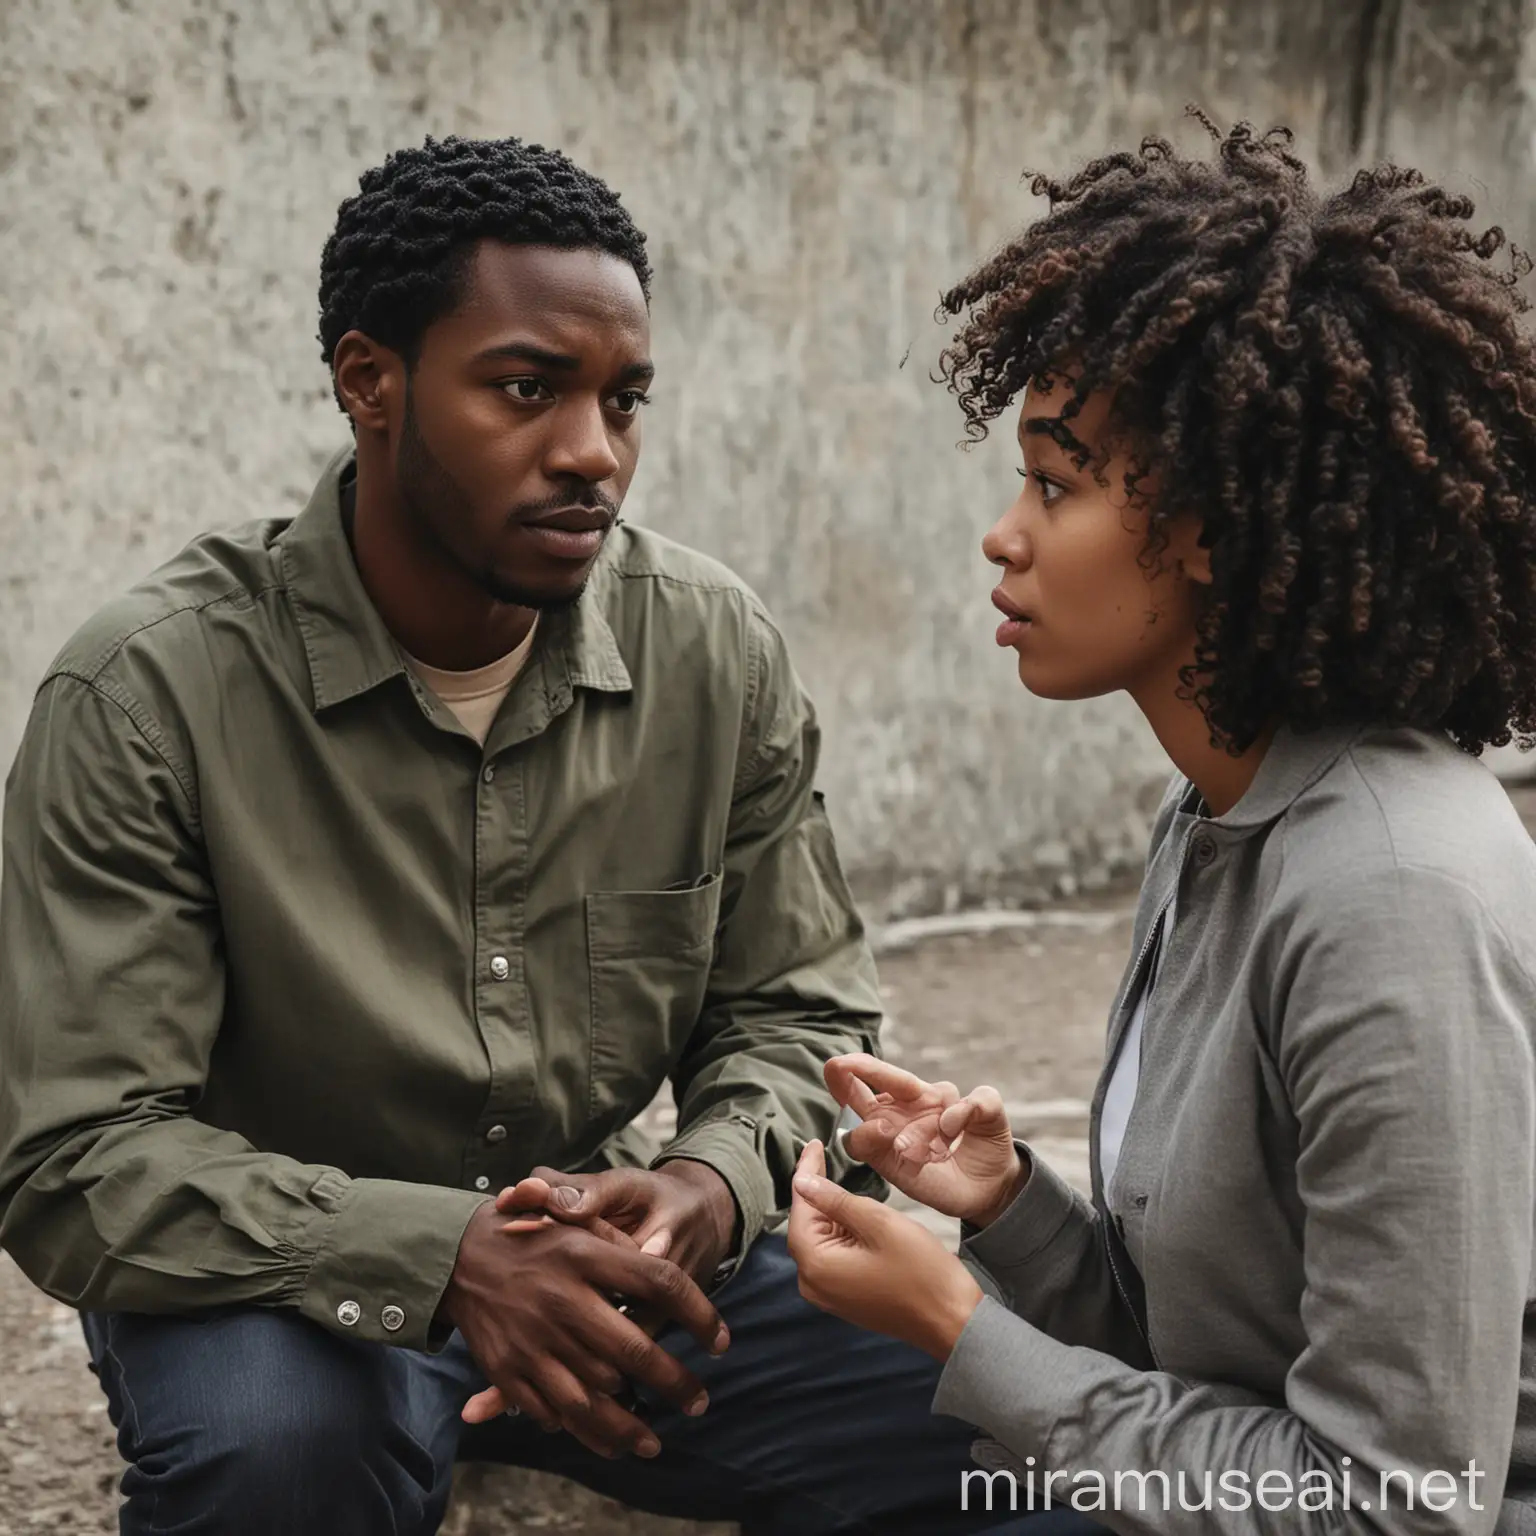 black male and female discussing an issue at unknown place